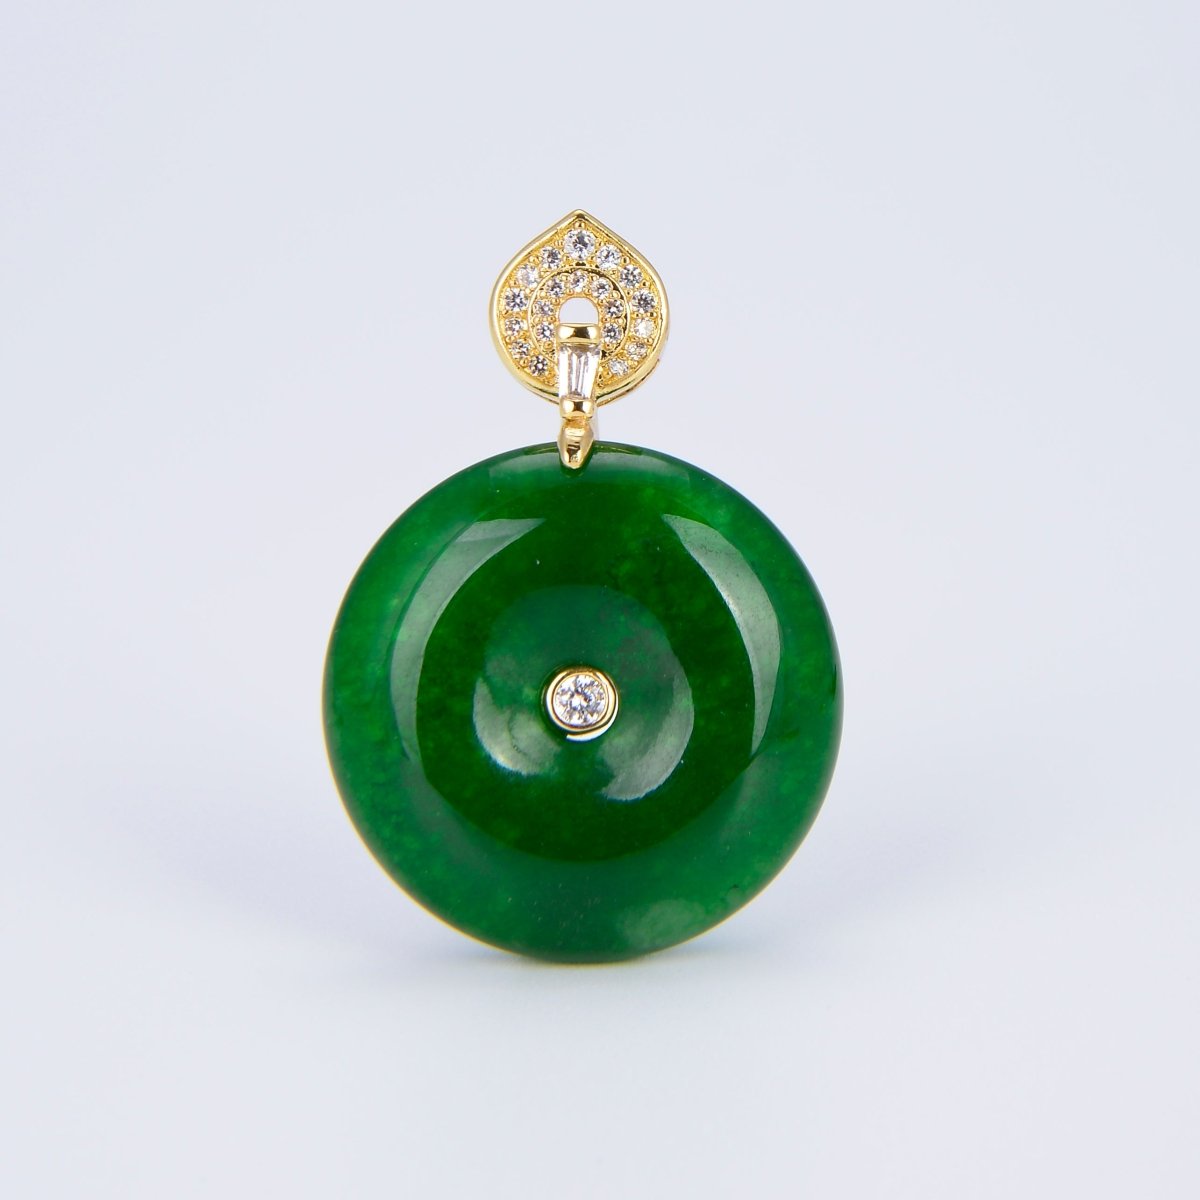 Stunning Chinese Green Donut Charm Green Jade Pendant Lucky Stone with Gold Lotus Bail for Necklace Supply O-224 - DLUXCA